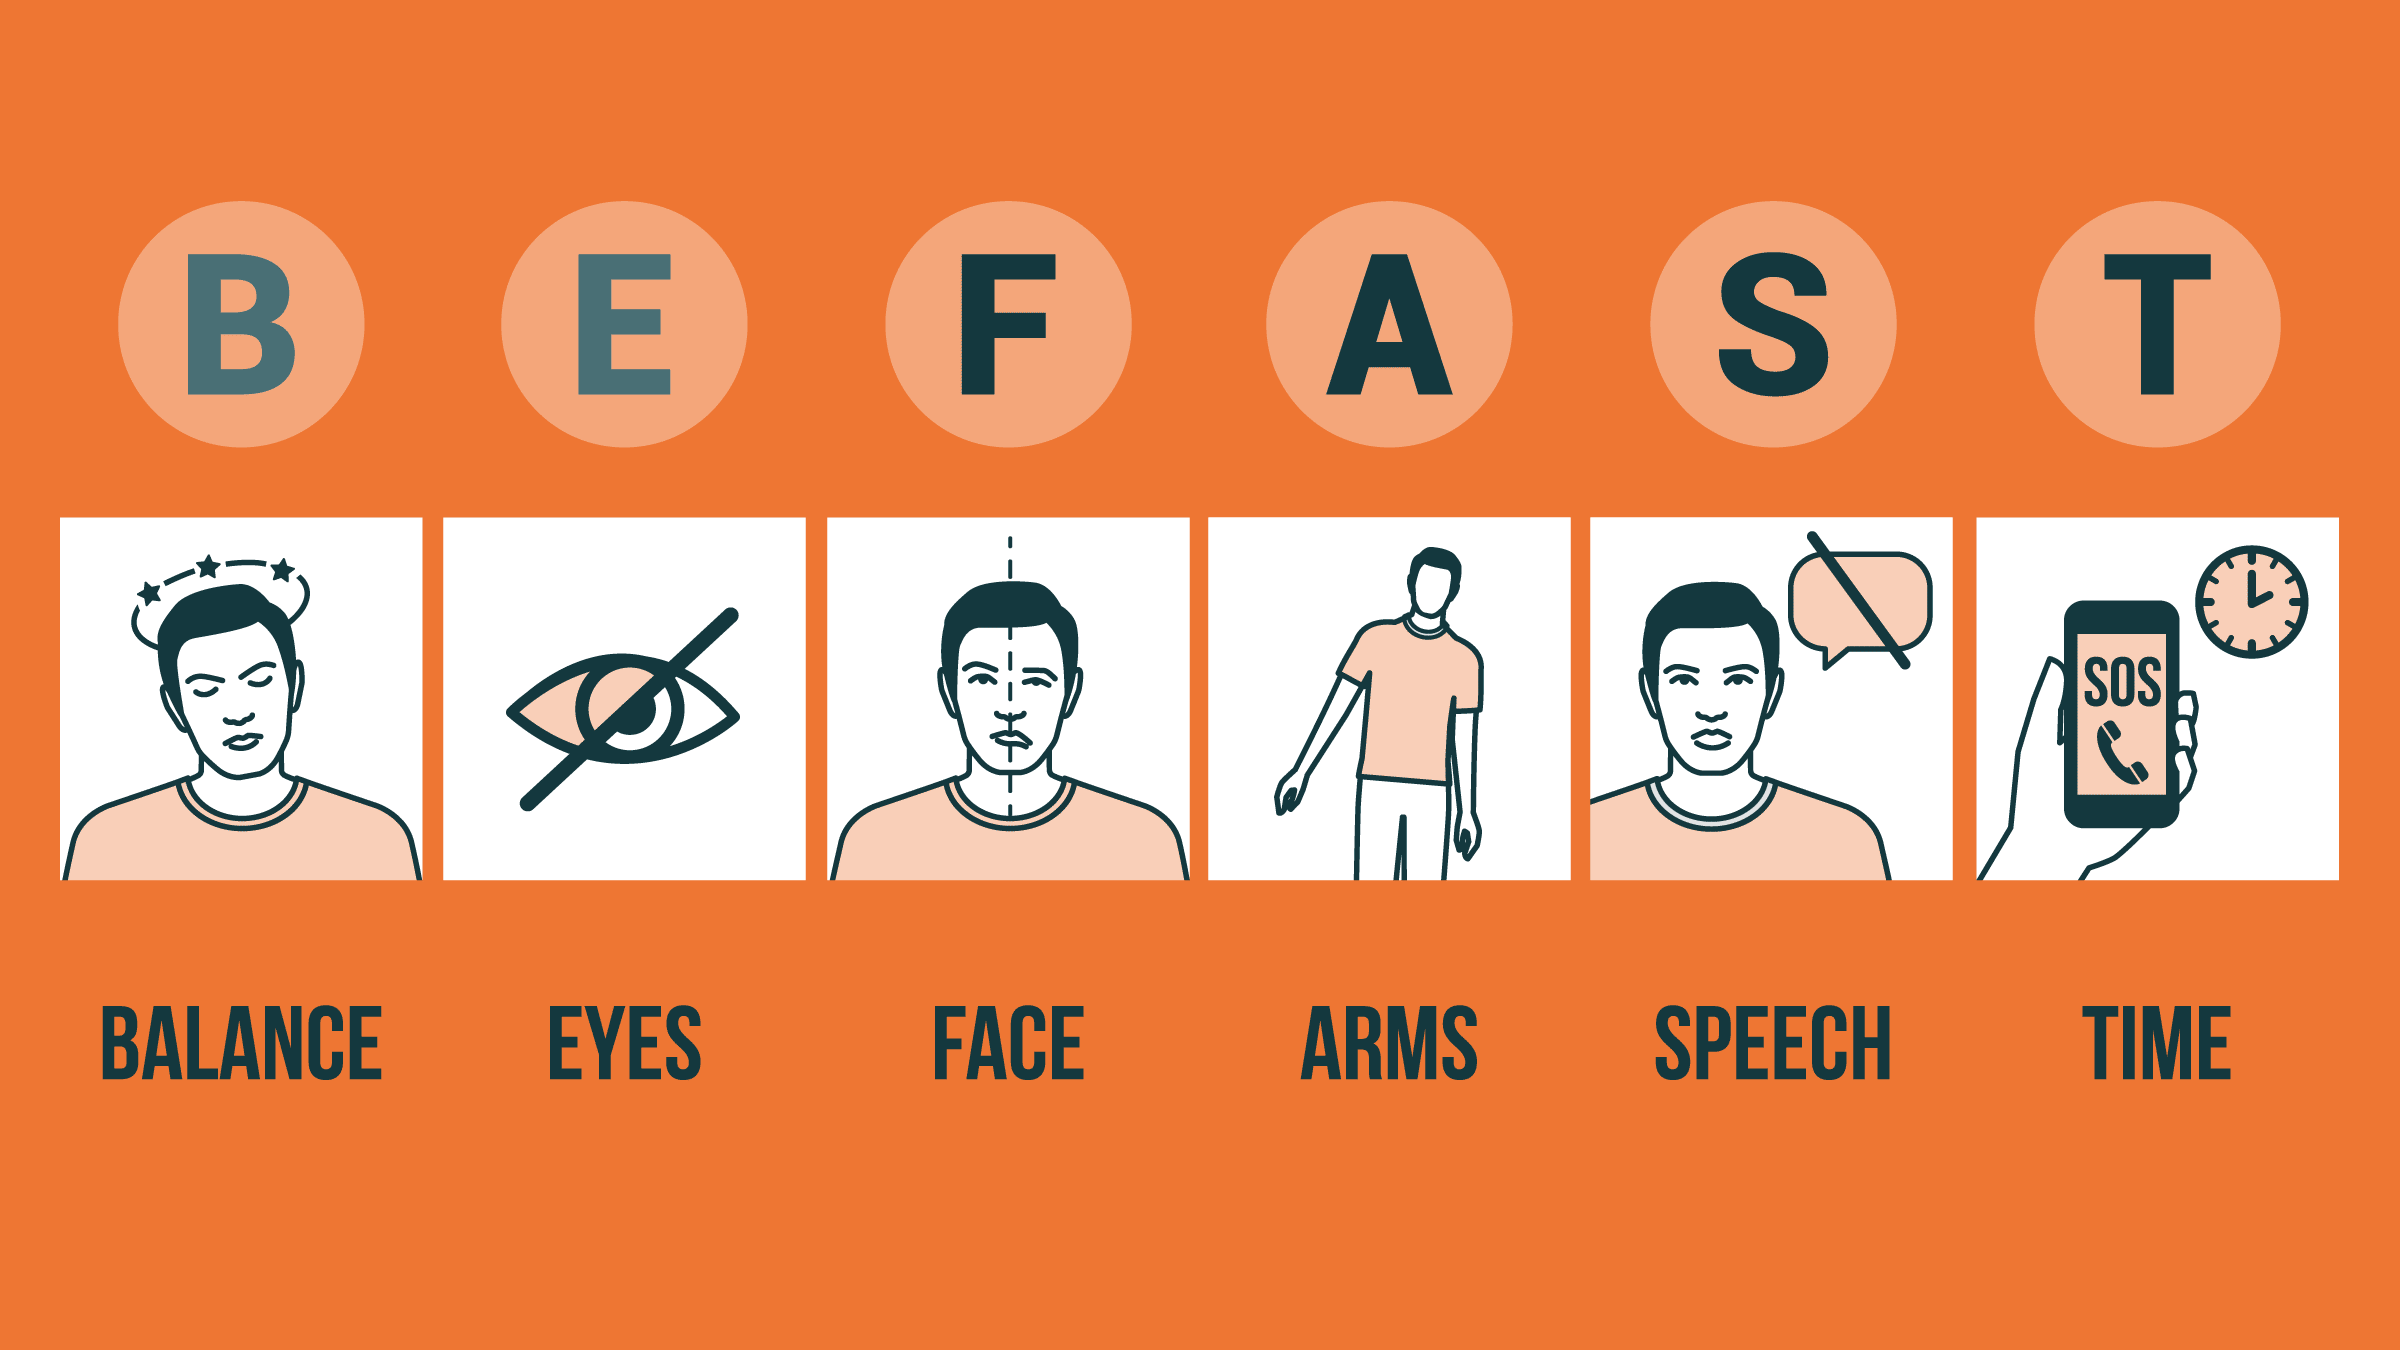 BEFAST is the commonly used stroke acronym to help the public easily remember the signs of a stroke. (Ohio State Health)